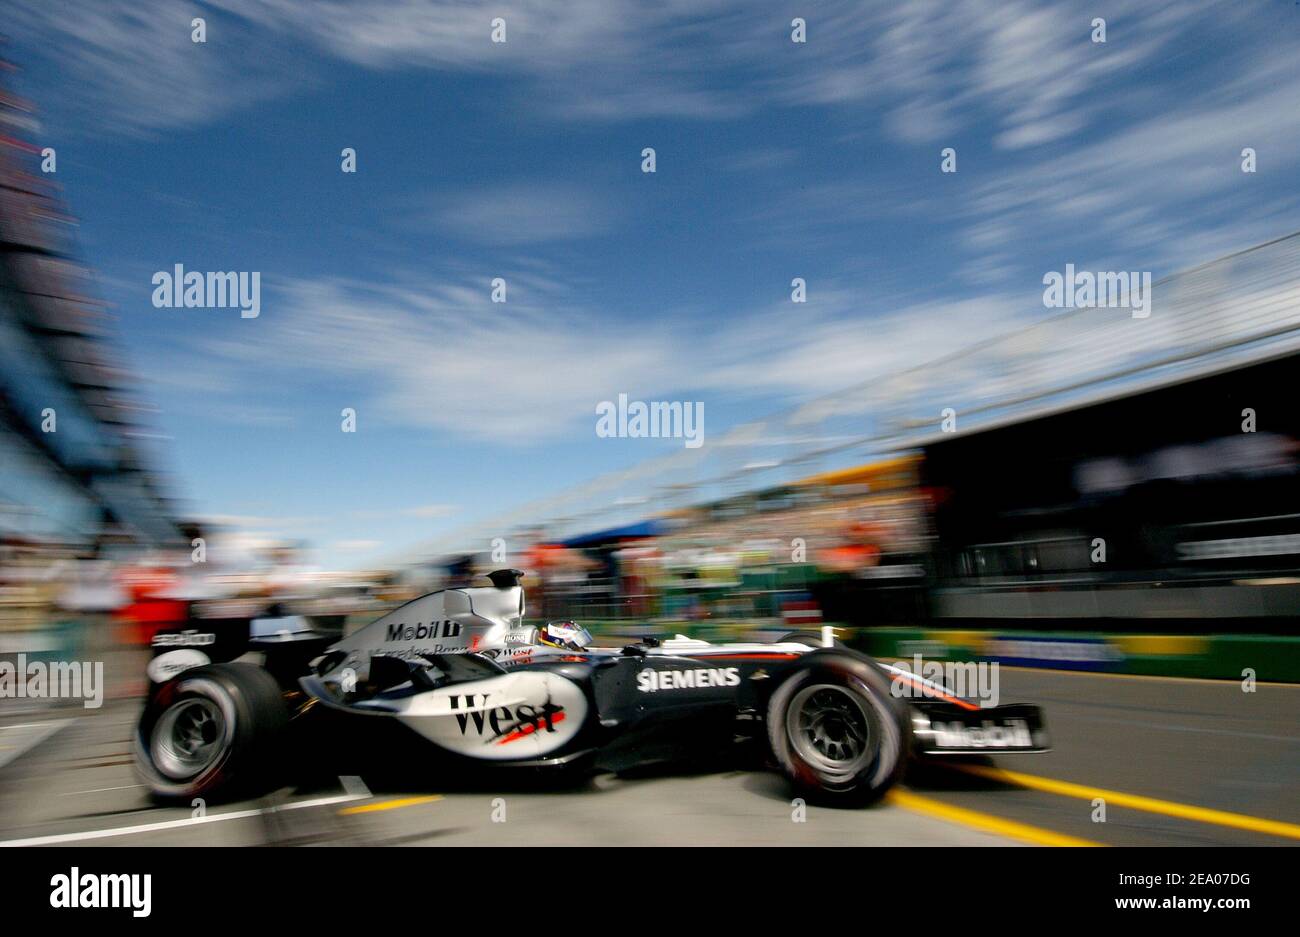 Colombian Formula 1 driver Juan Pablo Montoya (team McLaren Mercedes) during the first Formula 1 Grand Prix in Melbourne, Australia, on March 04, 2005. Photo by Thierry Gromik/ABACA. Stock Photo